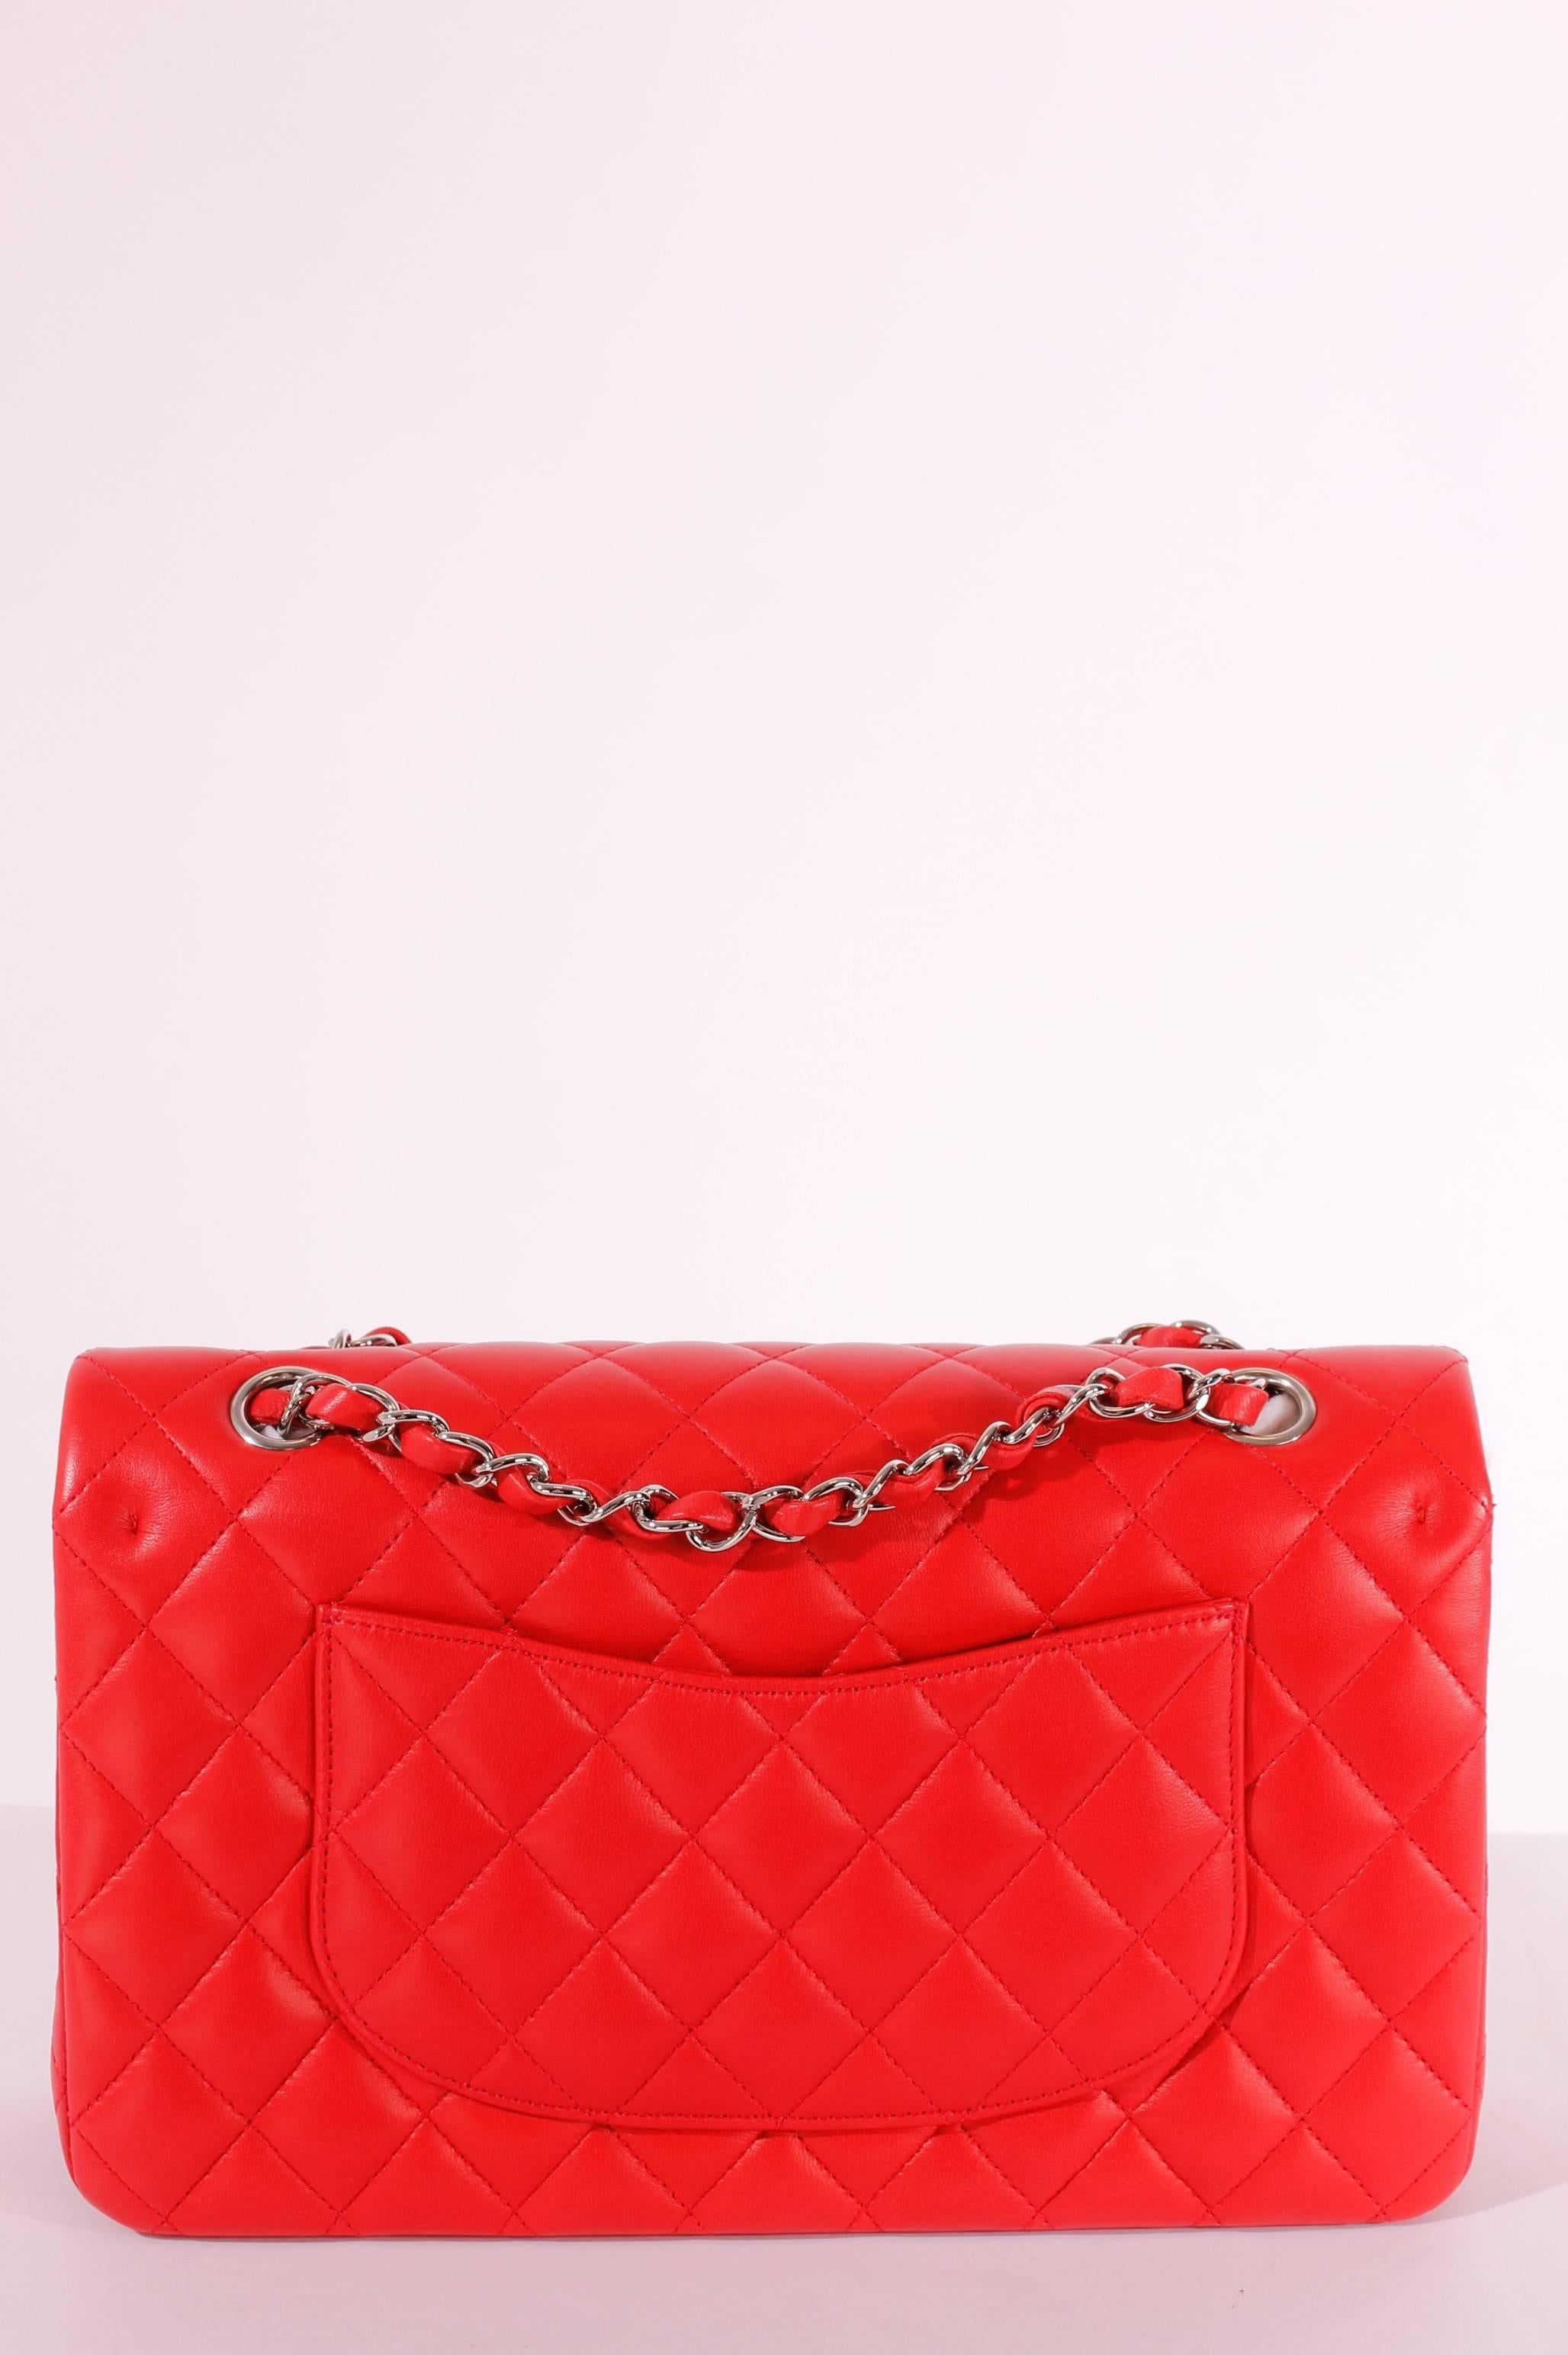 2005 Chanel 2.55 Medium Classic Double Flap Bag - red/silver 1